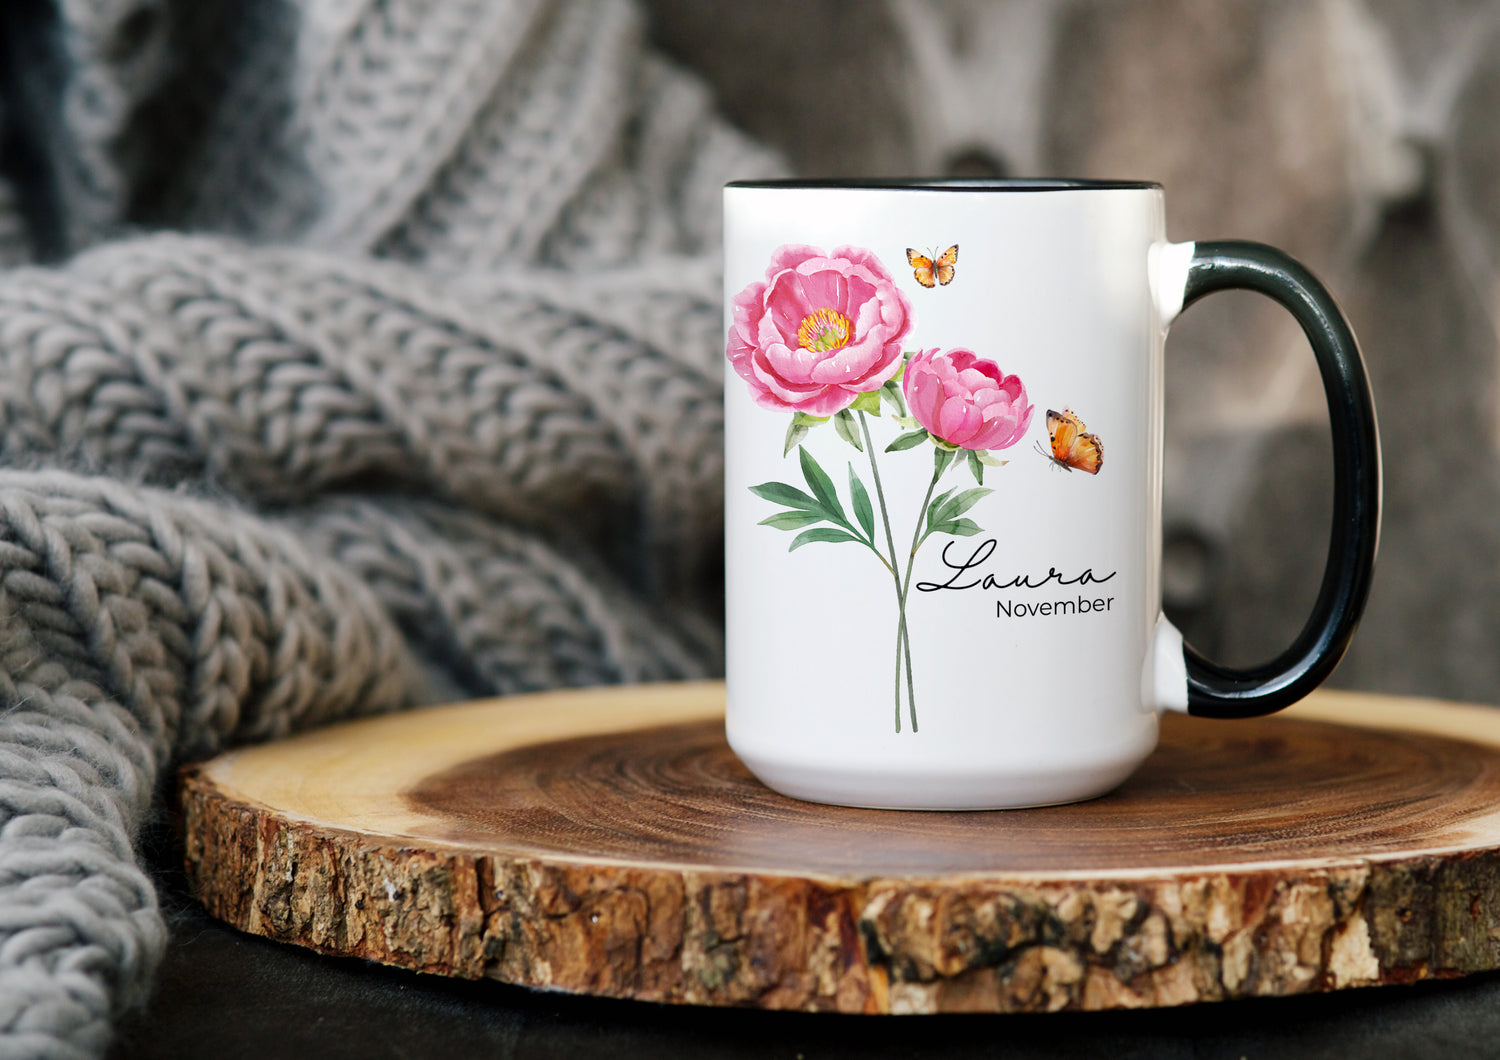 personalized mug with text and image